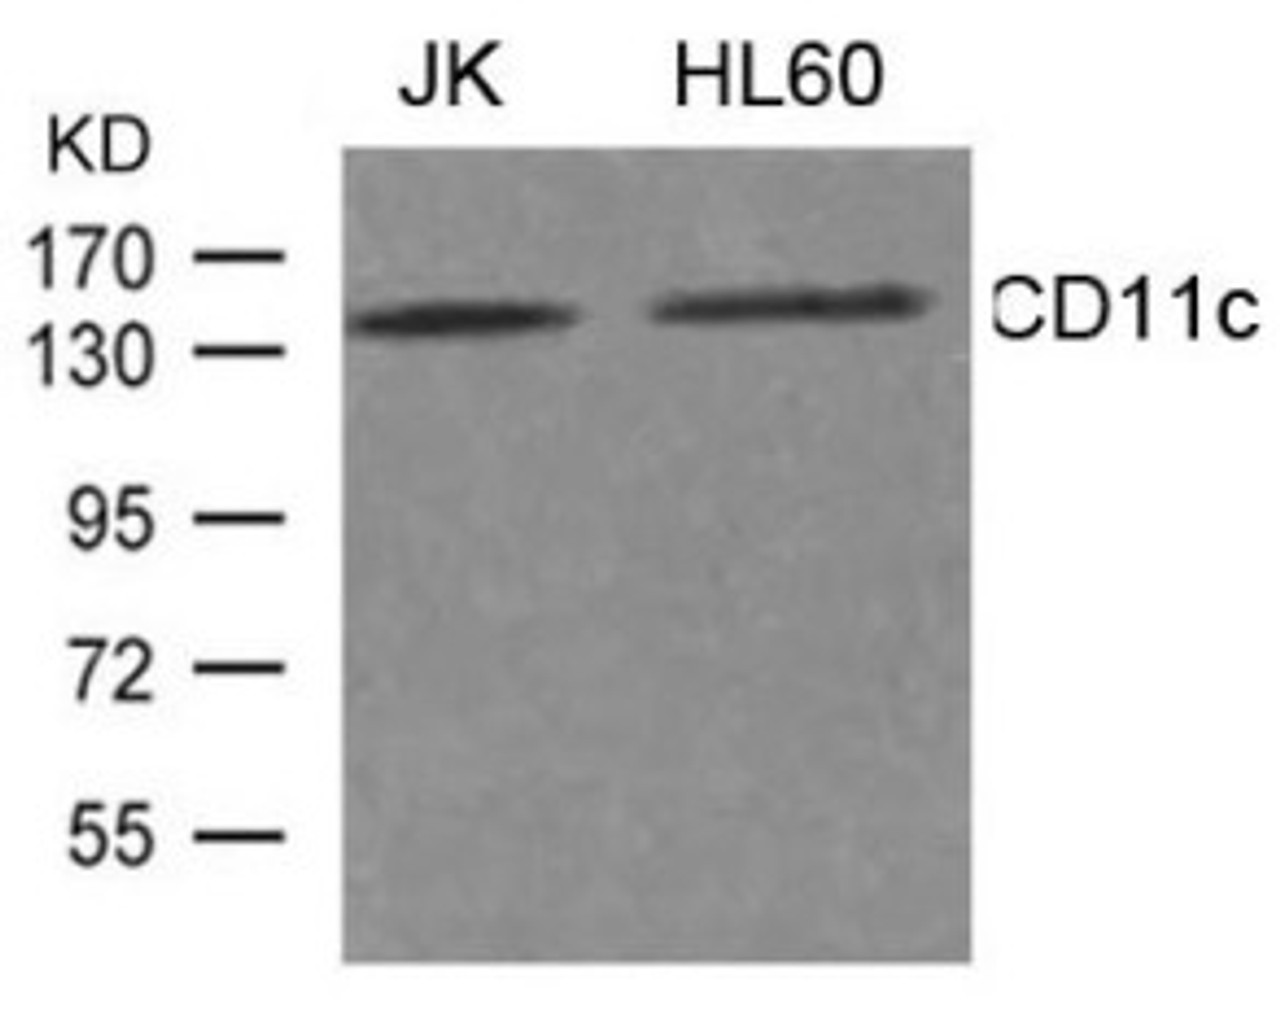 Western blot analysis of extract from JK, HL-60 cells using CD11c Antibody.